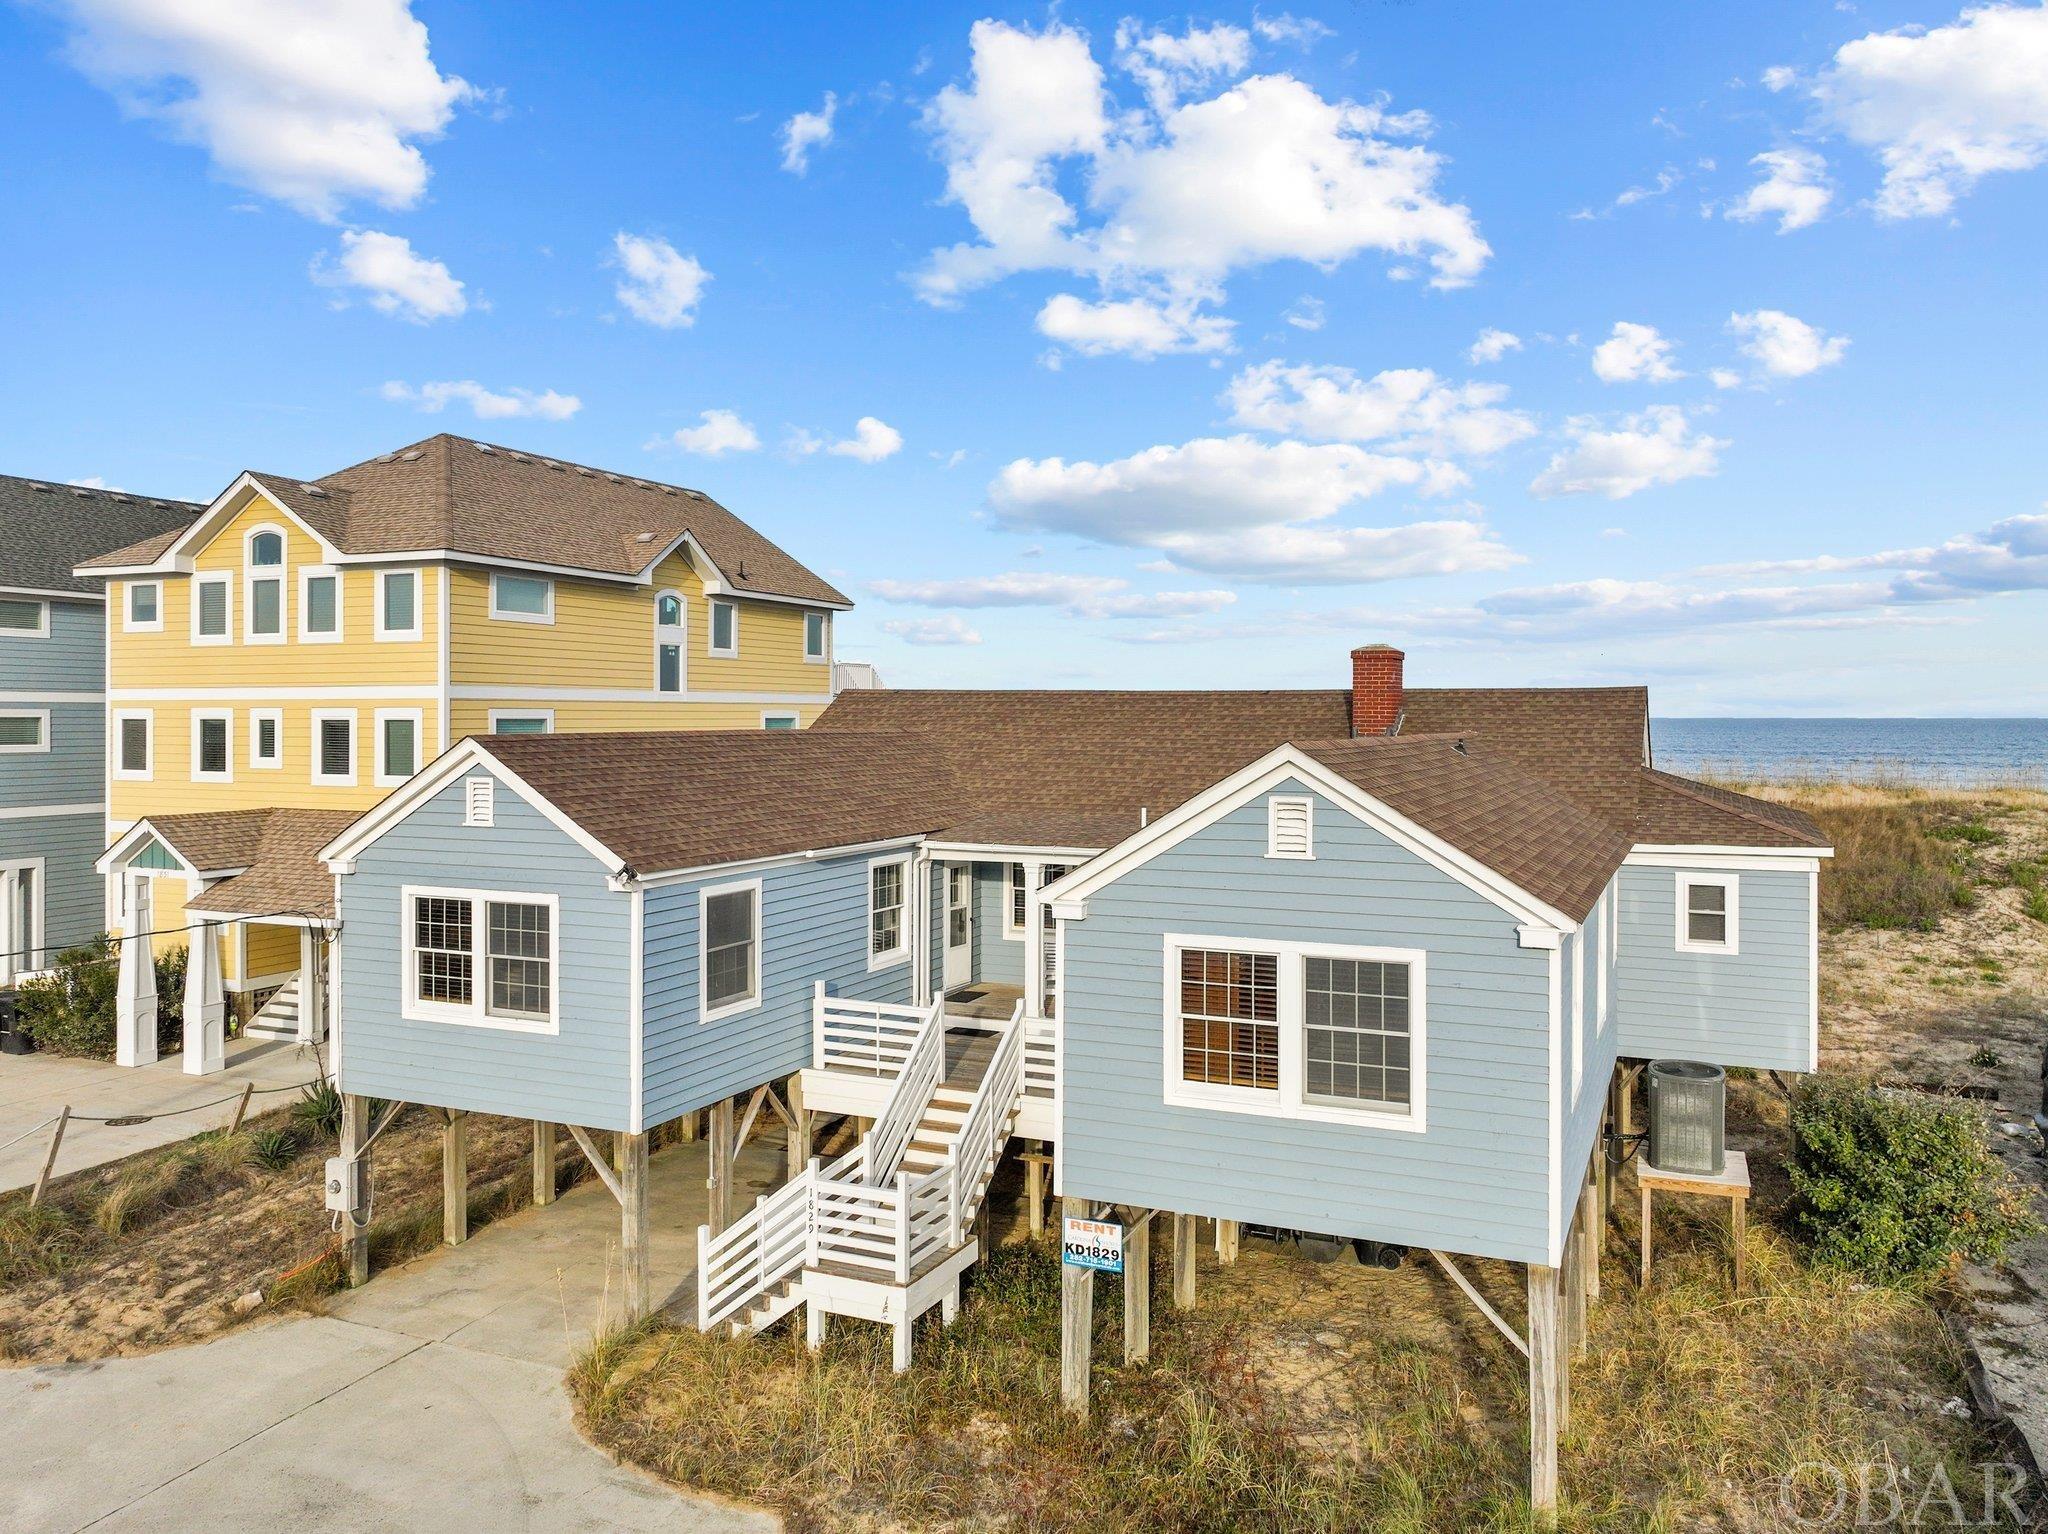 Classic Oceanfront Cottage on a rare 75ft Wide Lot.  Ocean Views!  Huge 19,000 square foot lot with a wide and vegetated dune!  Step into a piece of history on the shores of the Atlantic Ocean with this vintage gem nestled in the heart of Kill Devil Hills, NC.  This 4-bedroom, 3.5-bathroom home stands proud on an expansive 75ft wide oceanfront lot, a rarity that sets it apart.  Witness breathtaking panoramic views of the Atlantic from your doorstep, complemented by a wide sandy beach and a protective dune—a unique blend of beauty and safety.  The property's depth and elevation provide an assurance of tranquility and security.  Built in 1945, this classic Outer Banks cottage exudes timeless charm, boasting hardwood floors and solid T&G wood walls that whisper stories of a bygone era.  Merging the nostalgia of yesteryears with modern comfort, the property features a new roof, freshly painted exterior, new decks perfect for lounging, and a brand-new private boardwalk leading directly to the ocean.  Enjoy the convenience of a central location in Kill Devil Hills, where entertainment, dining, and shopping options abound, catering to both residents and vacationers alike.  There are so many possibilities to use and enhance this amazing oceanfront property.  It is charming and comfortable and can be enjoyed immediately.  Due to the size of the lot, expansion and the addition of a pool may be an option.  Additionally, this would be an amazing property to start fresh and build your new dream home. This is a one of a kind home and a one of a kind opportunity.  Don't wait!